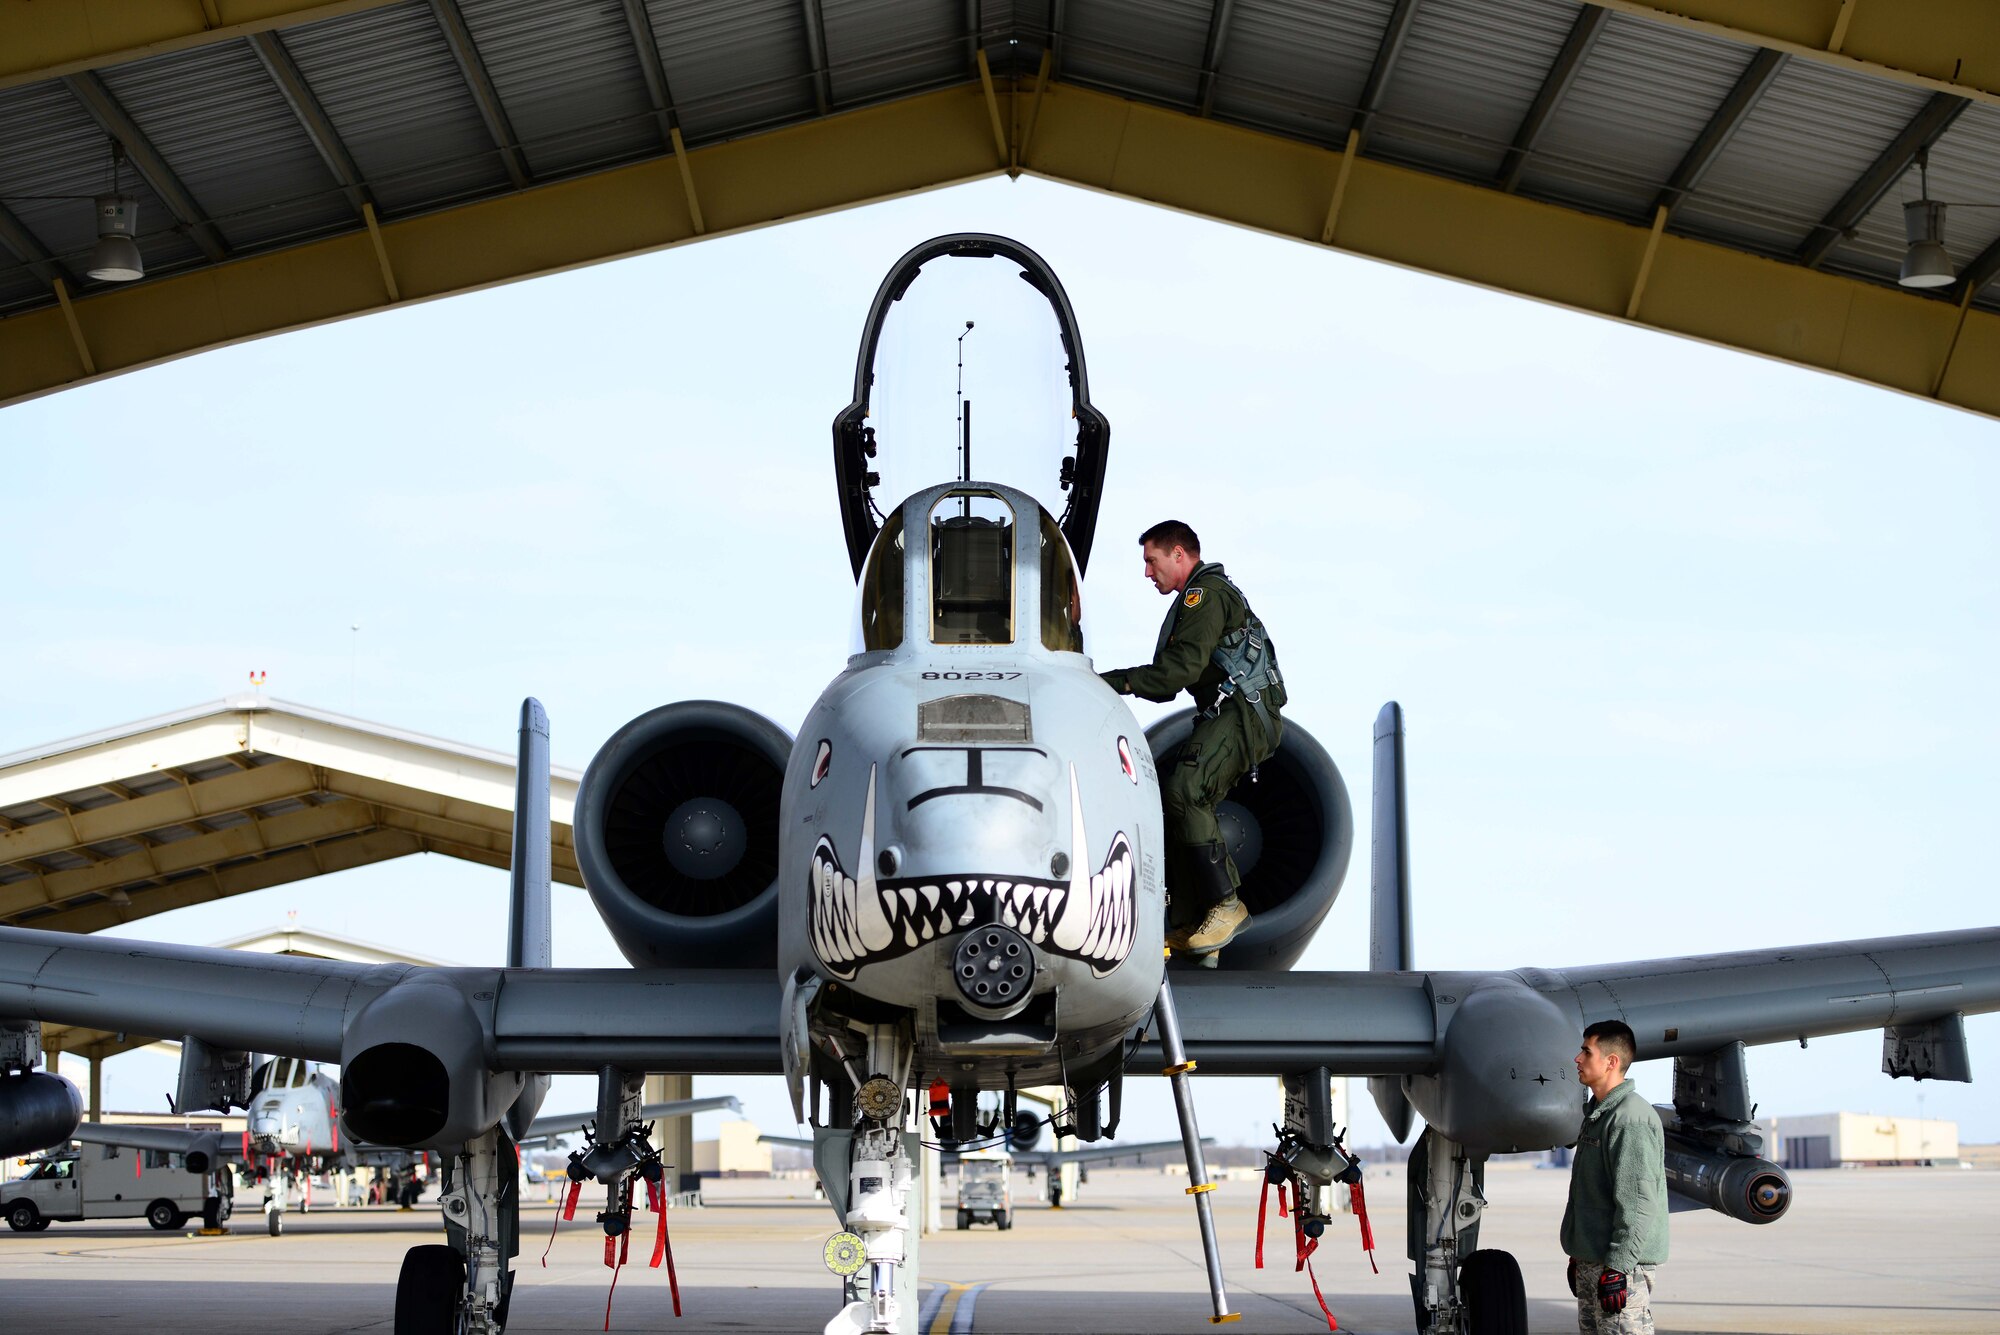 U.S. Air Force Lt. Col. Ryan Hodges, an A-10 Thunderbolt II pilot assigned to the 303rd Fighter Squadron, climbs into his aircraft during a local flying mission at Whiteman Air Force Base, Mo., Feb. 14, 2017. The A-10 Thunderbolt II has excellent maneuverability at low air speeds and altitude, and is a highly accurate and survivable weapons-delivery platform. The aircraft can loiter near battle areas for extended periods of time and operate in low ceiling and visibility conditions.